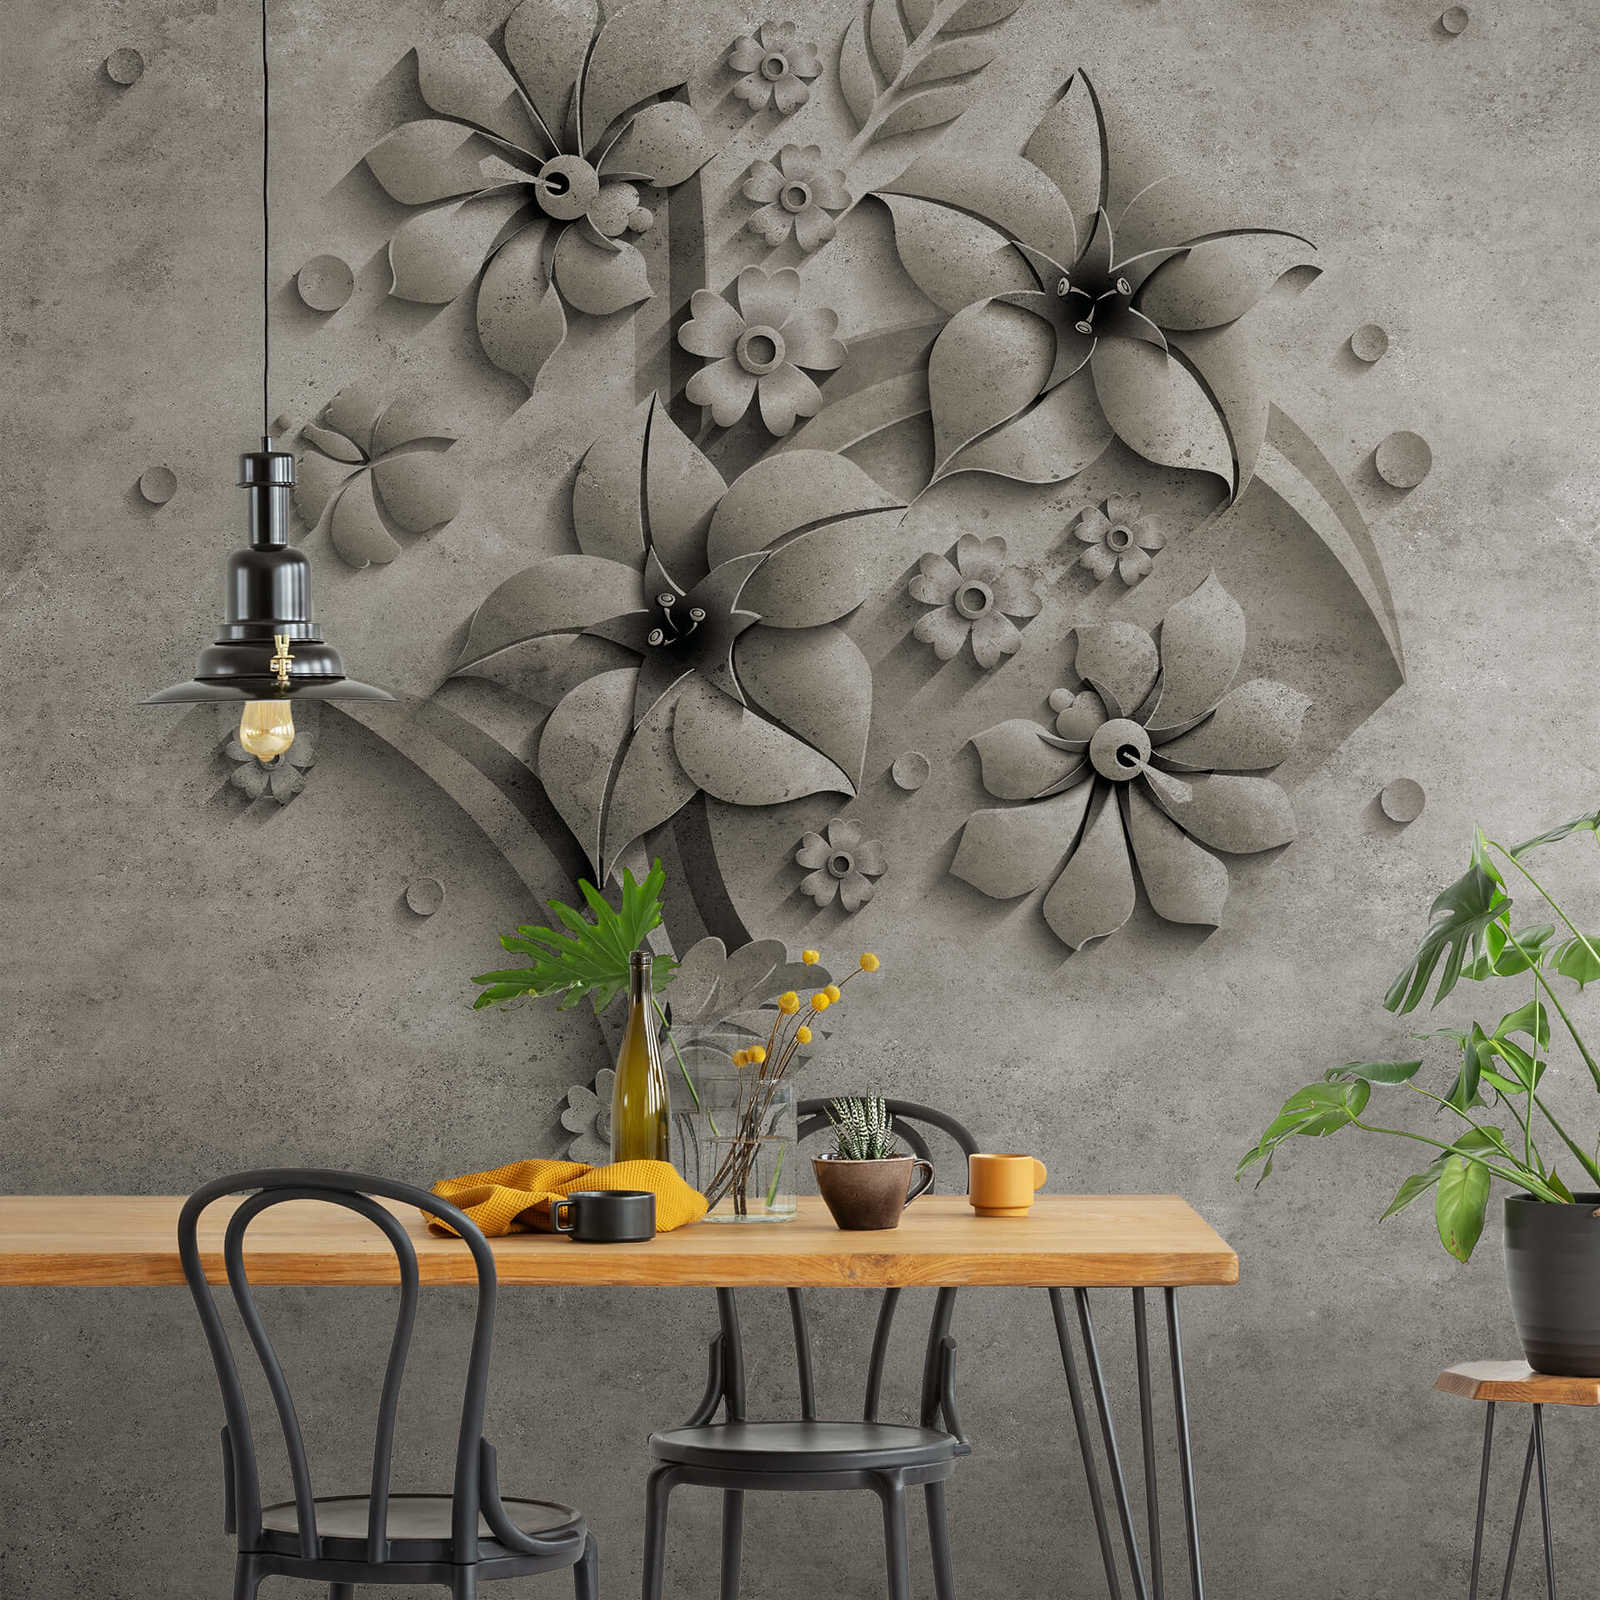             Photo wallpaper flowers on stone with concrete look design
        